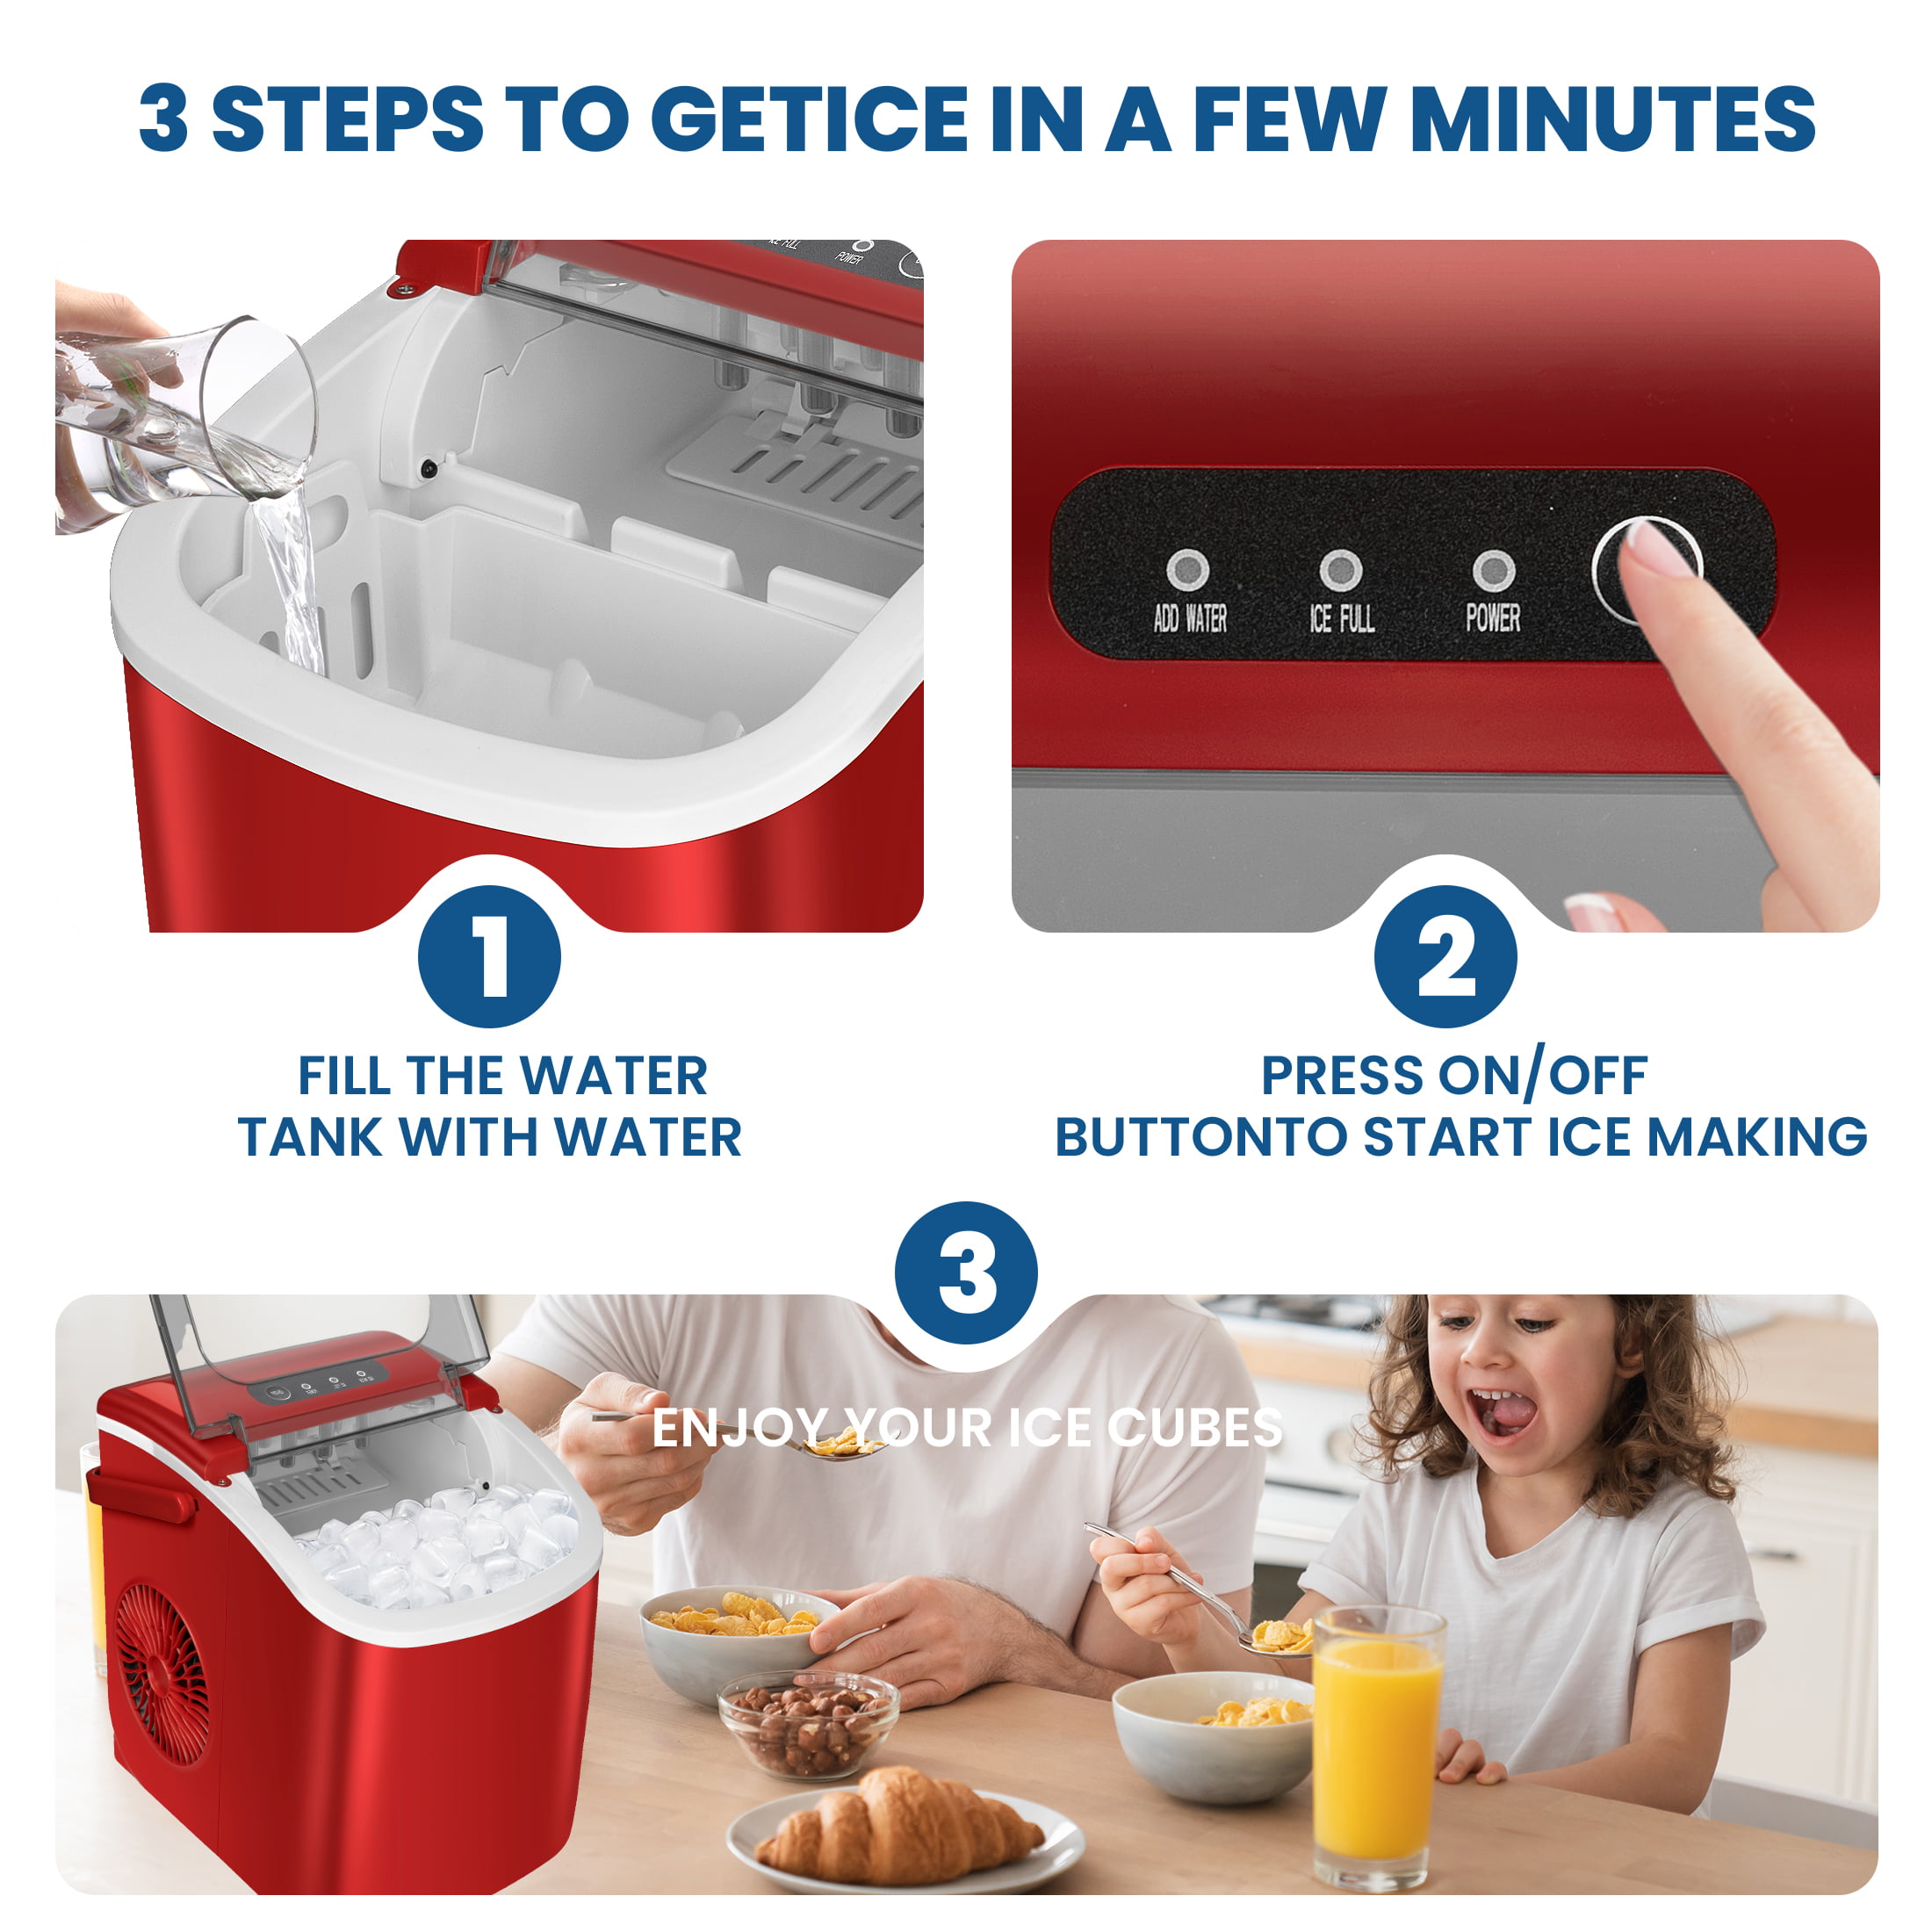 How to clean an ice maker machine in a few easy steps